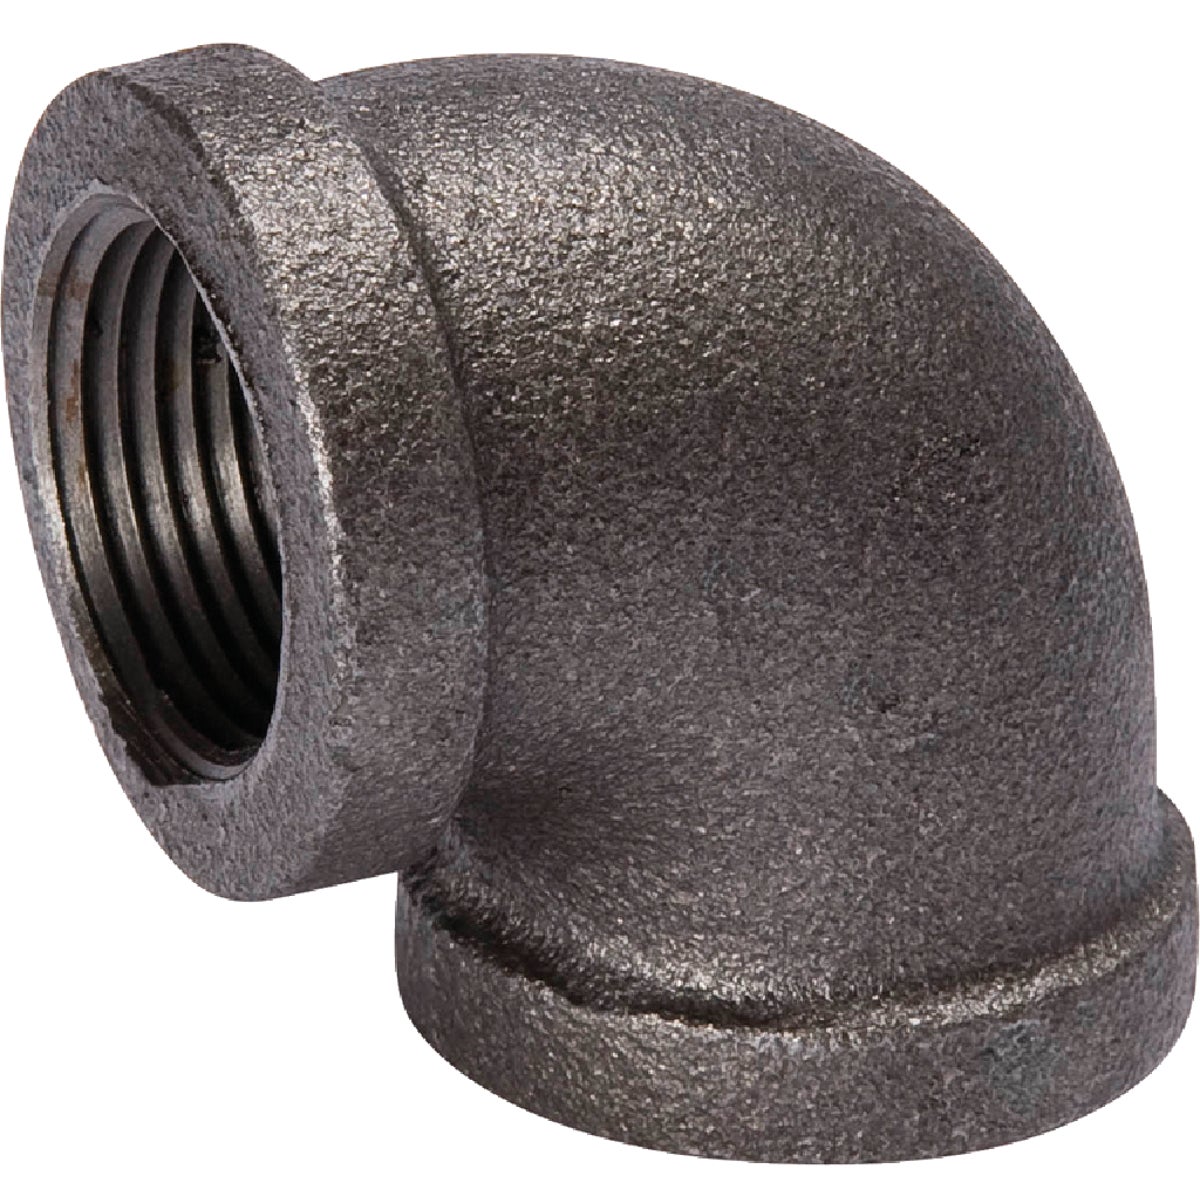 Southland 1/2 In. 90 Deg. Malleable Black Iron Elbow (1/4 Bend)